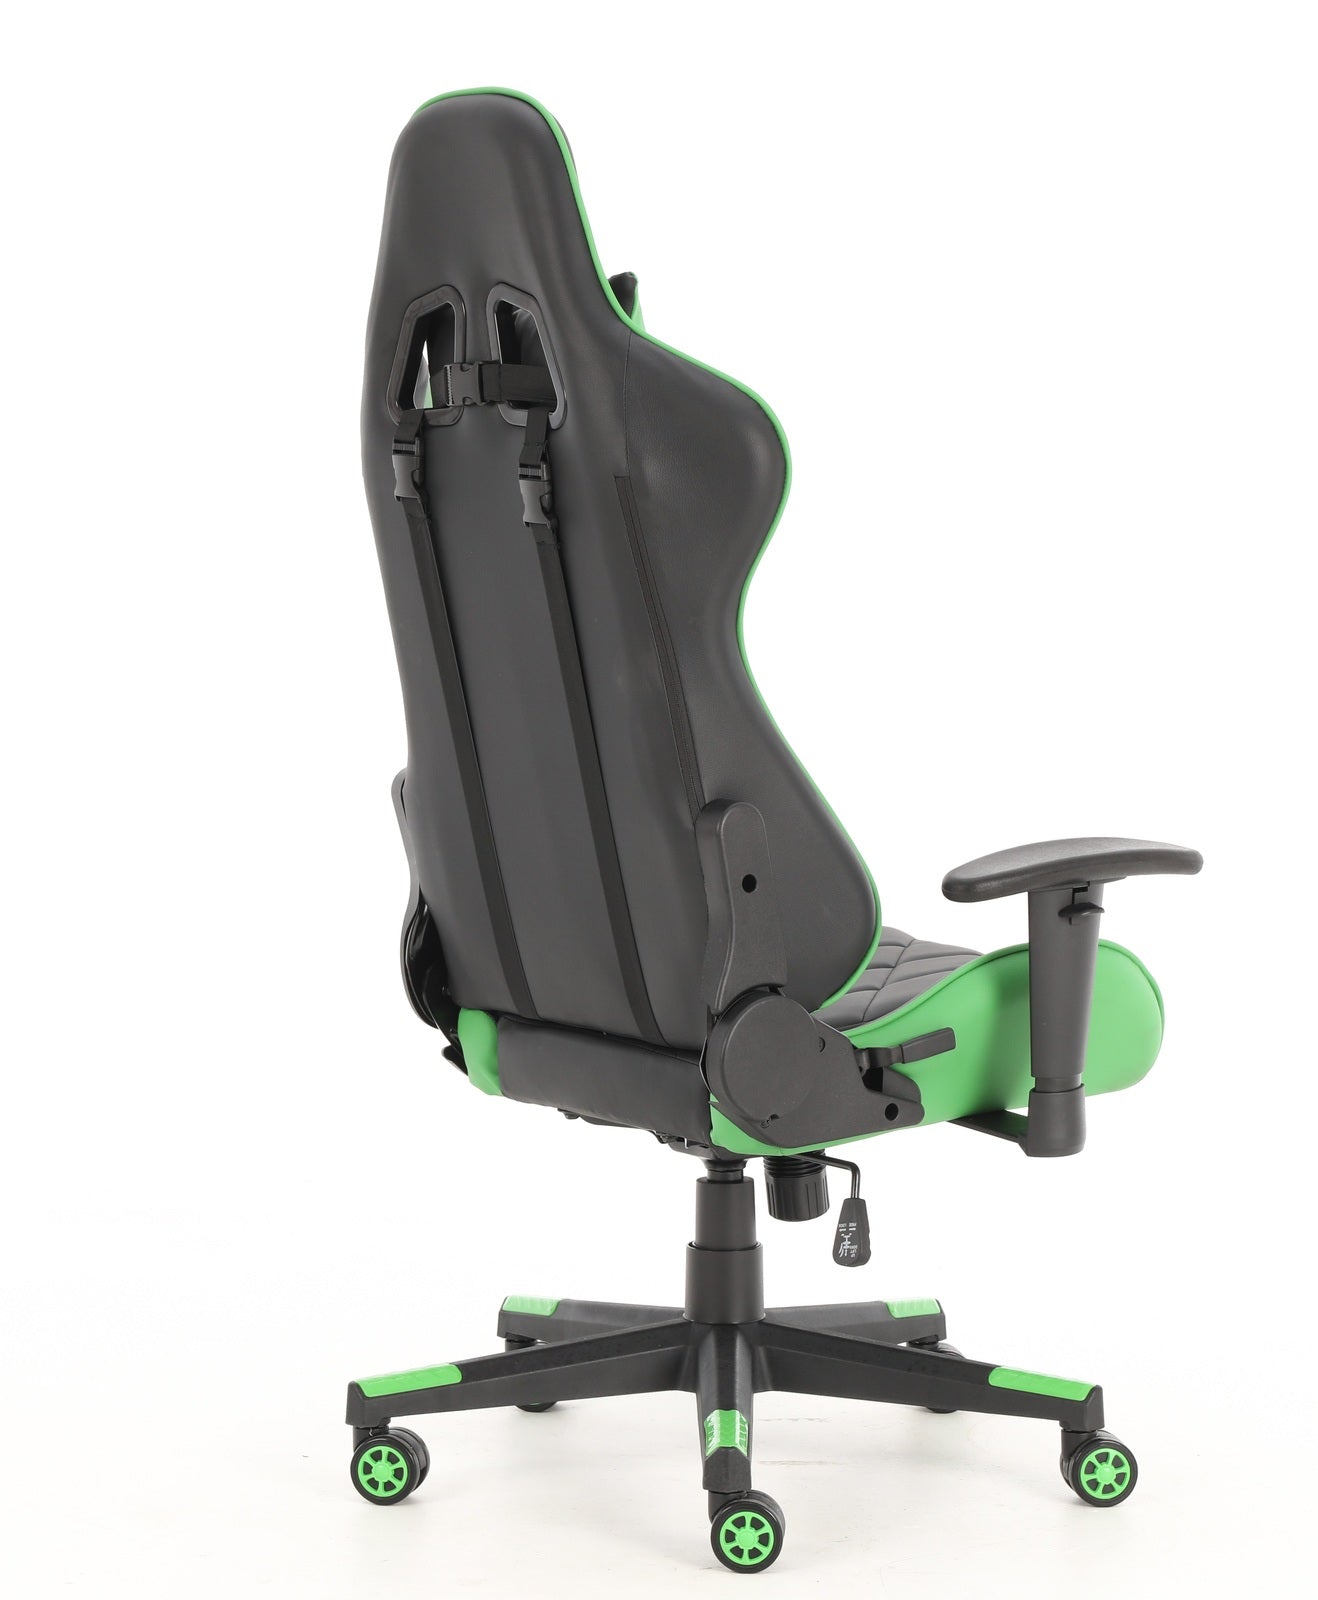 Playmax Elite Gaming Chair - Green and Black